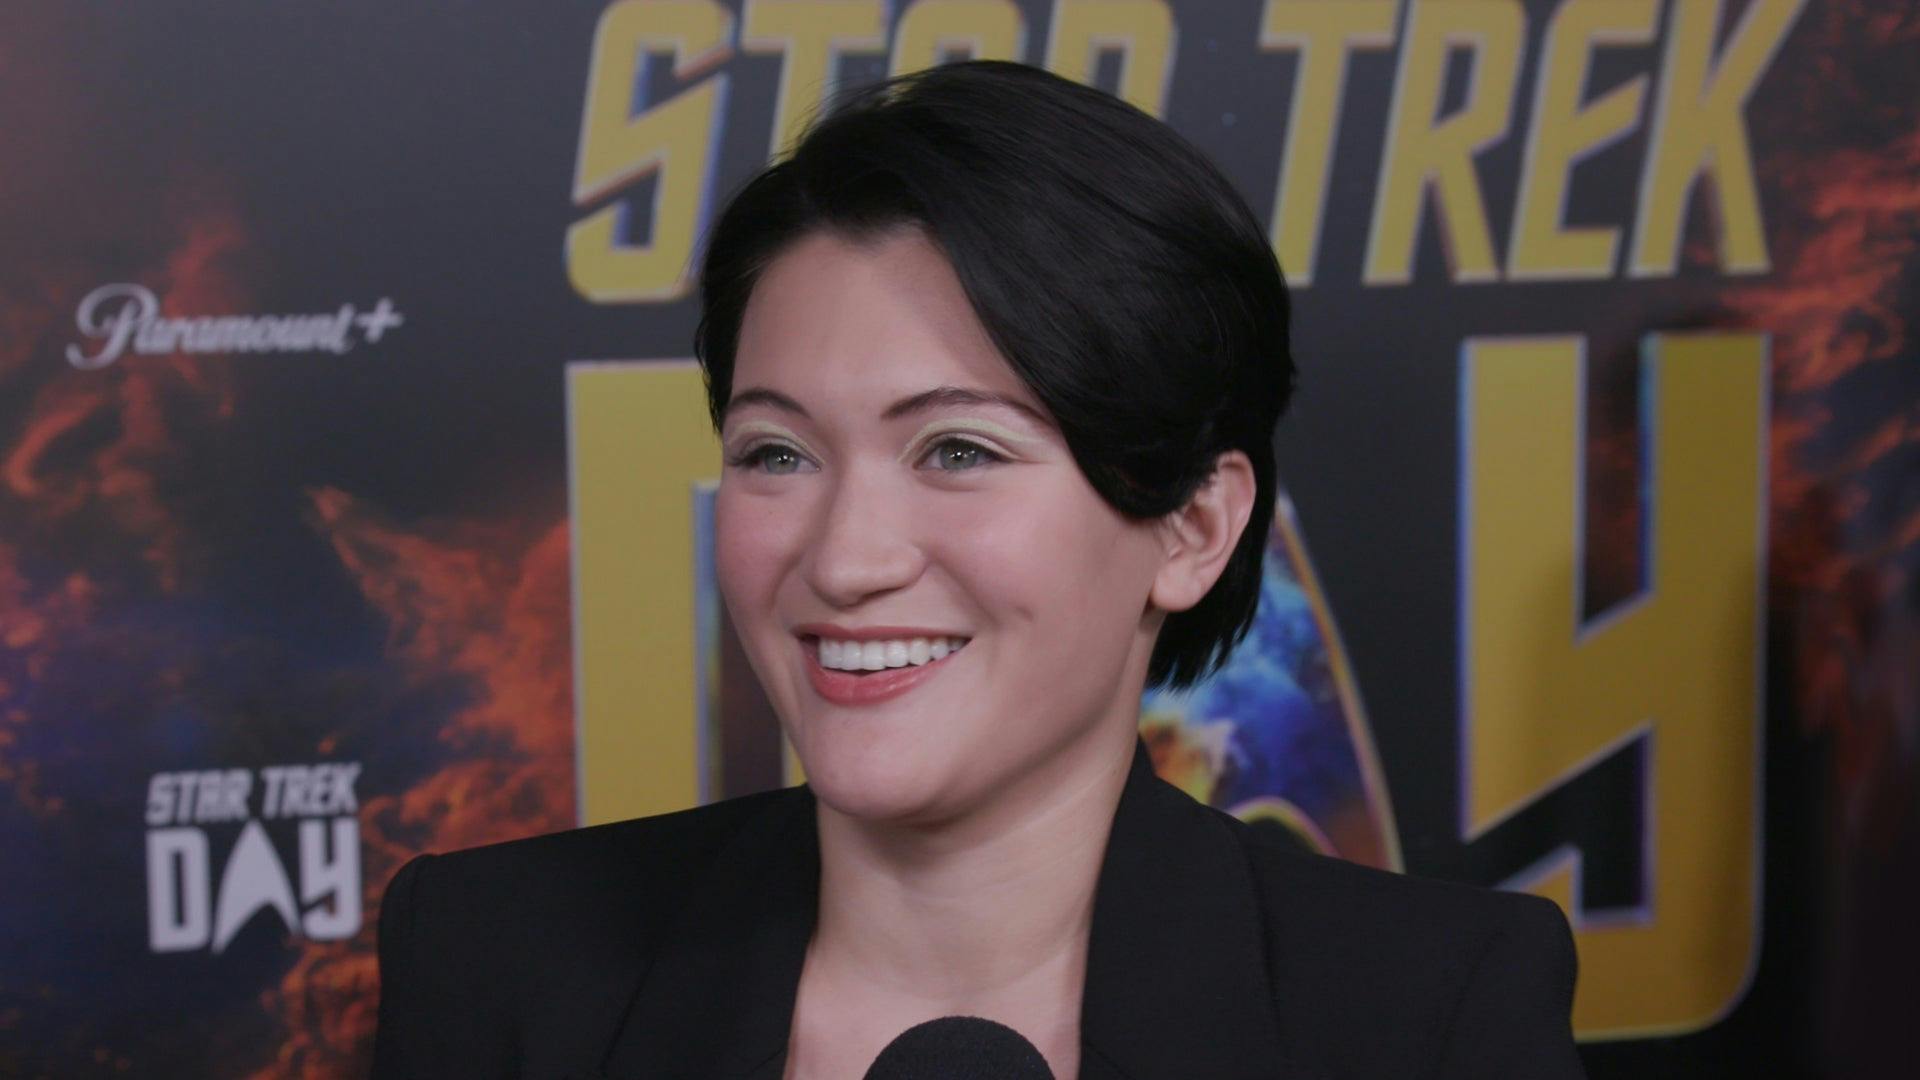 Isa Briones on the red carpet at Star Trek Day 2021